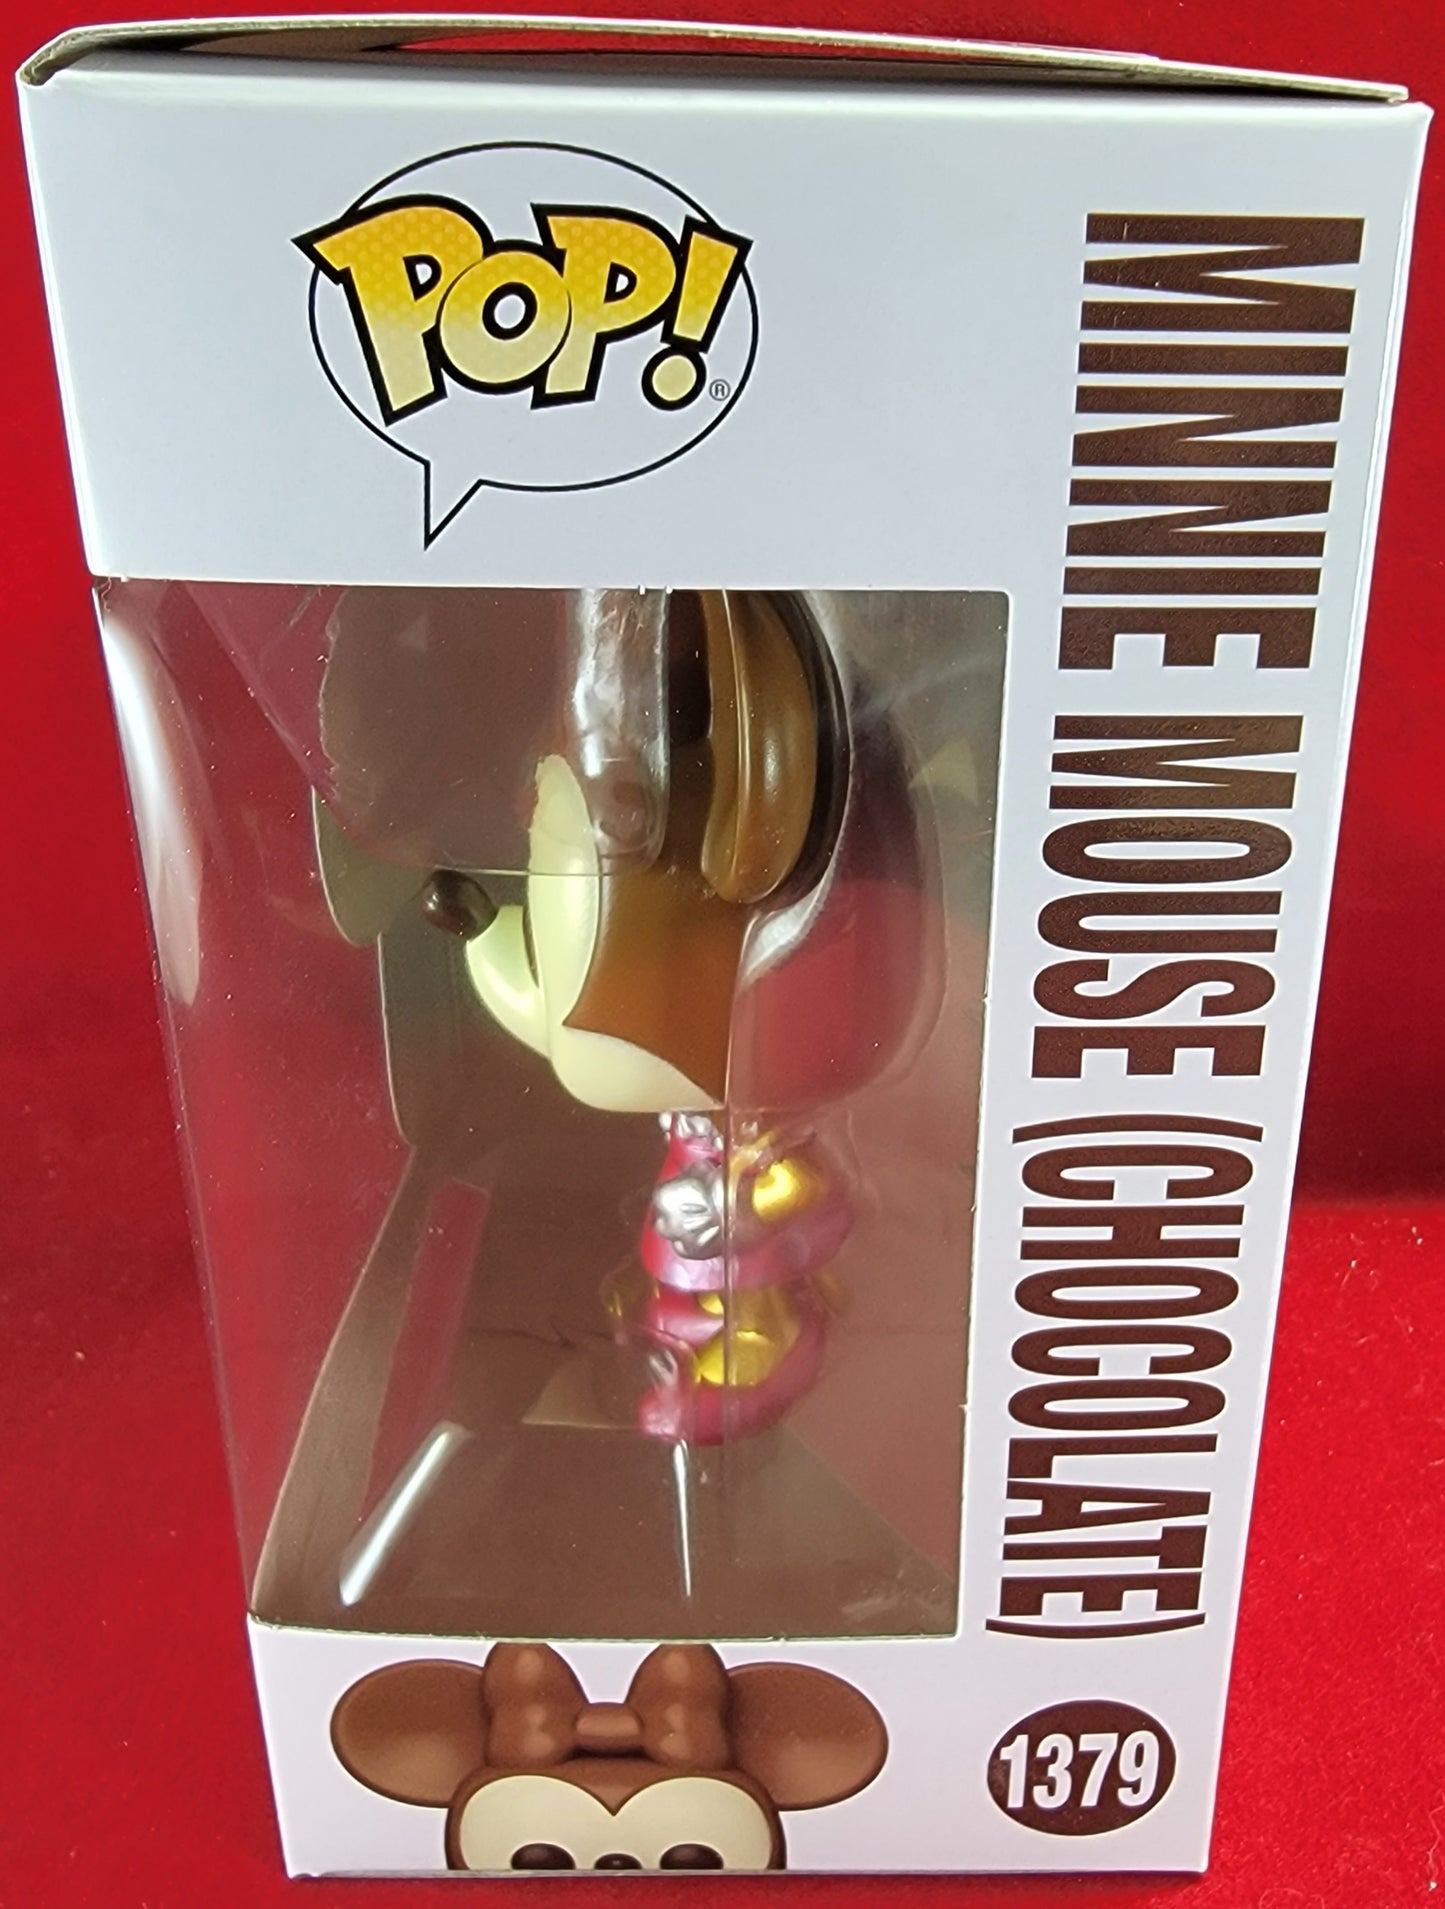 Minnie mouse (chocolate) funko # 1379 (nib) with pop protector